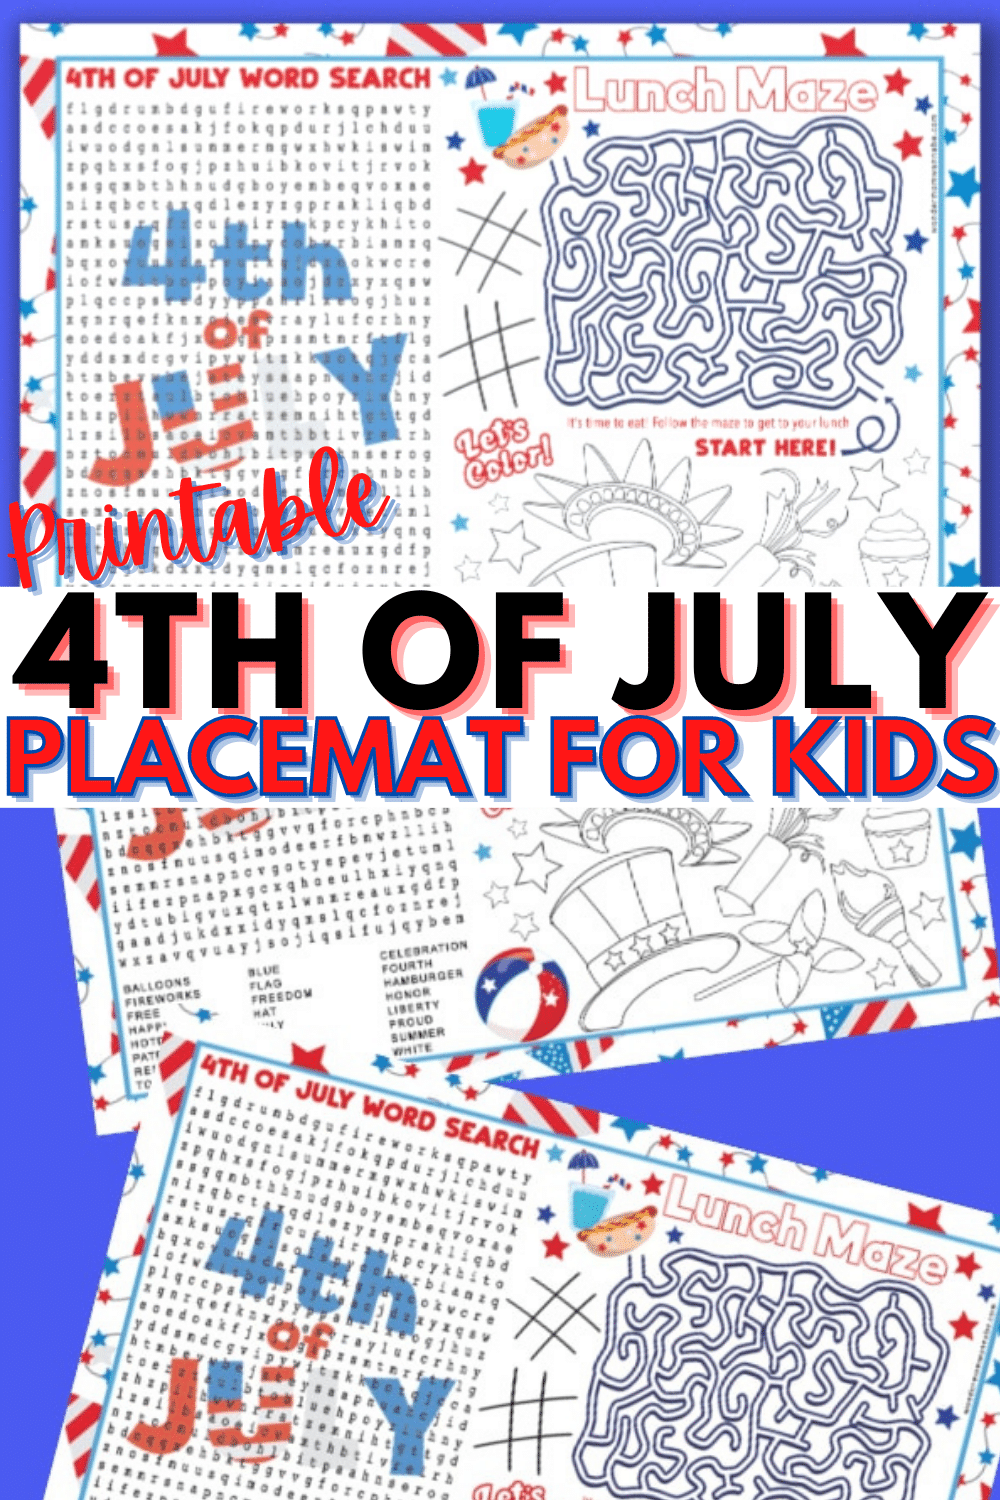 This printable 4th of July placemat for kids is patriotic and fun. A placemat with a word search, maze and coloring area, this will keep kids busy at meals. #printables #4thofJuly #placemats via @wondermomwannab